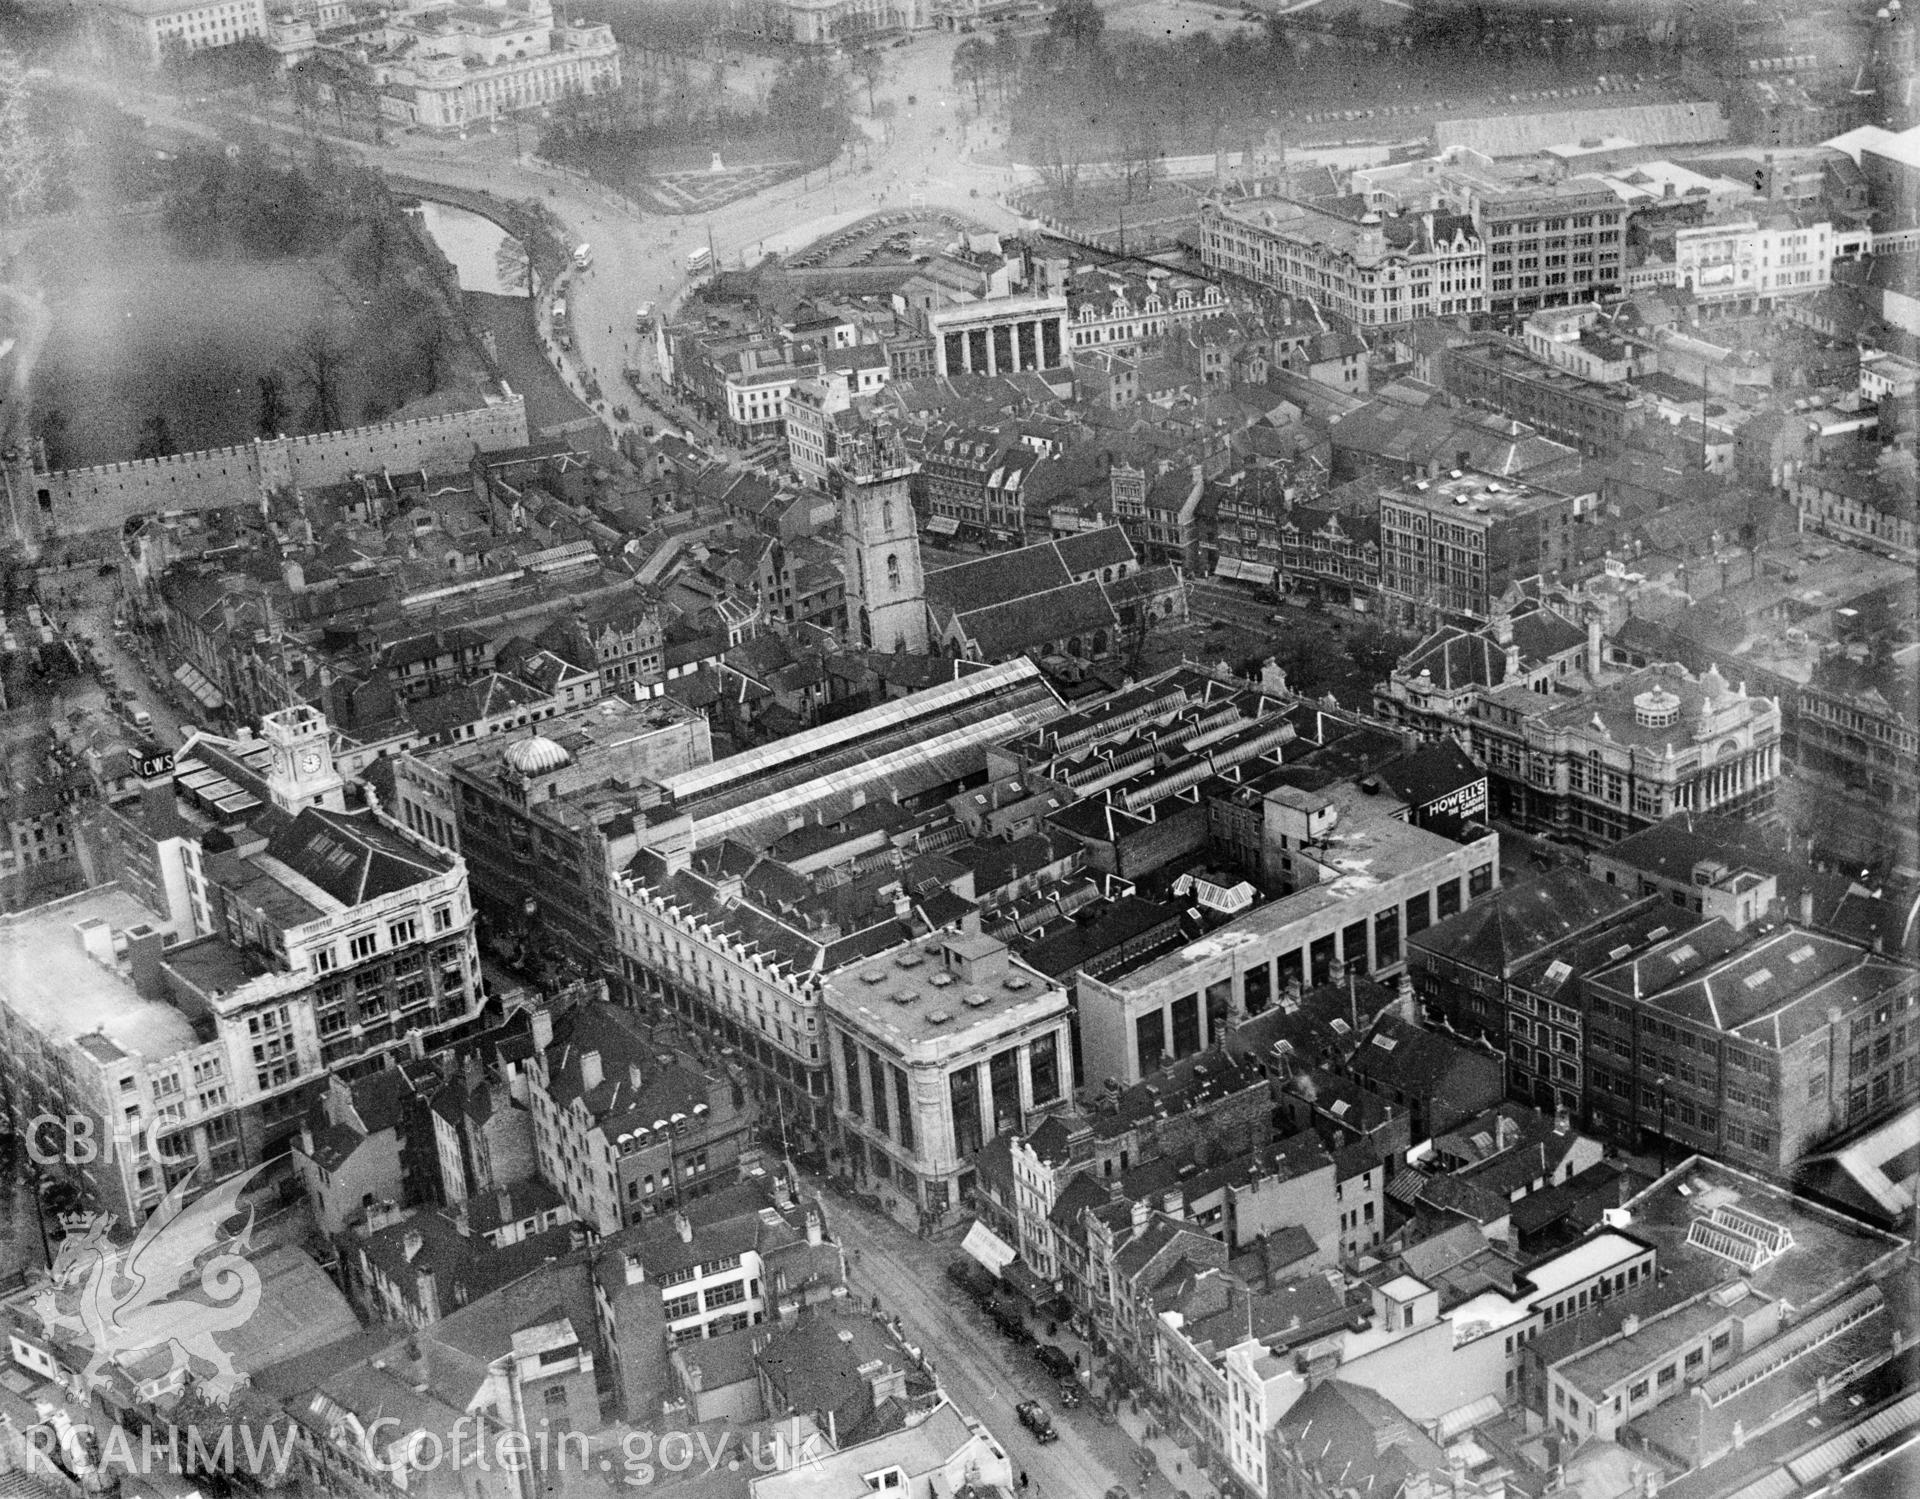 View of central Cardiff, showing James Howell & Co. Ltd., oblique aerial view. 5?x4? black and white glass plate negative.